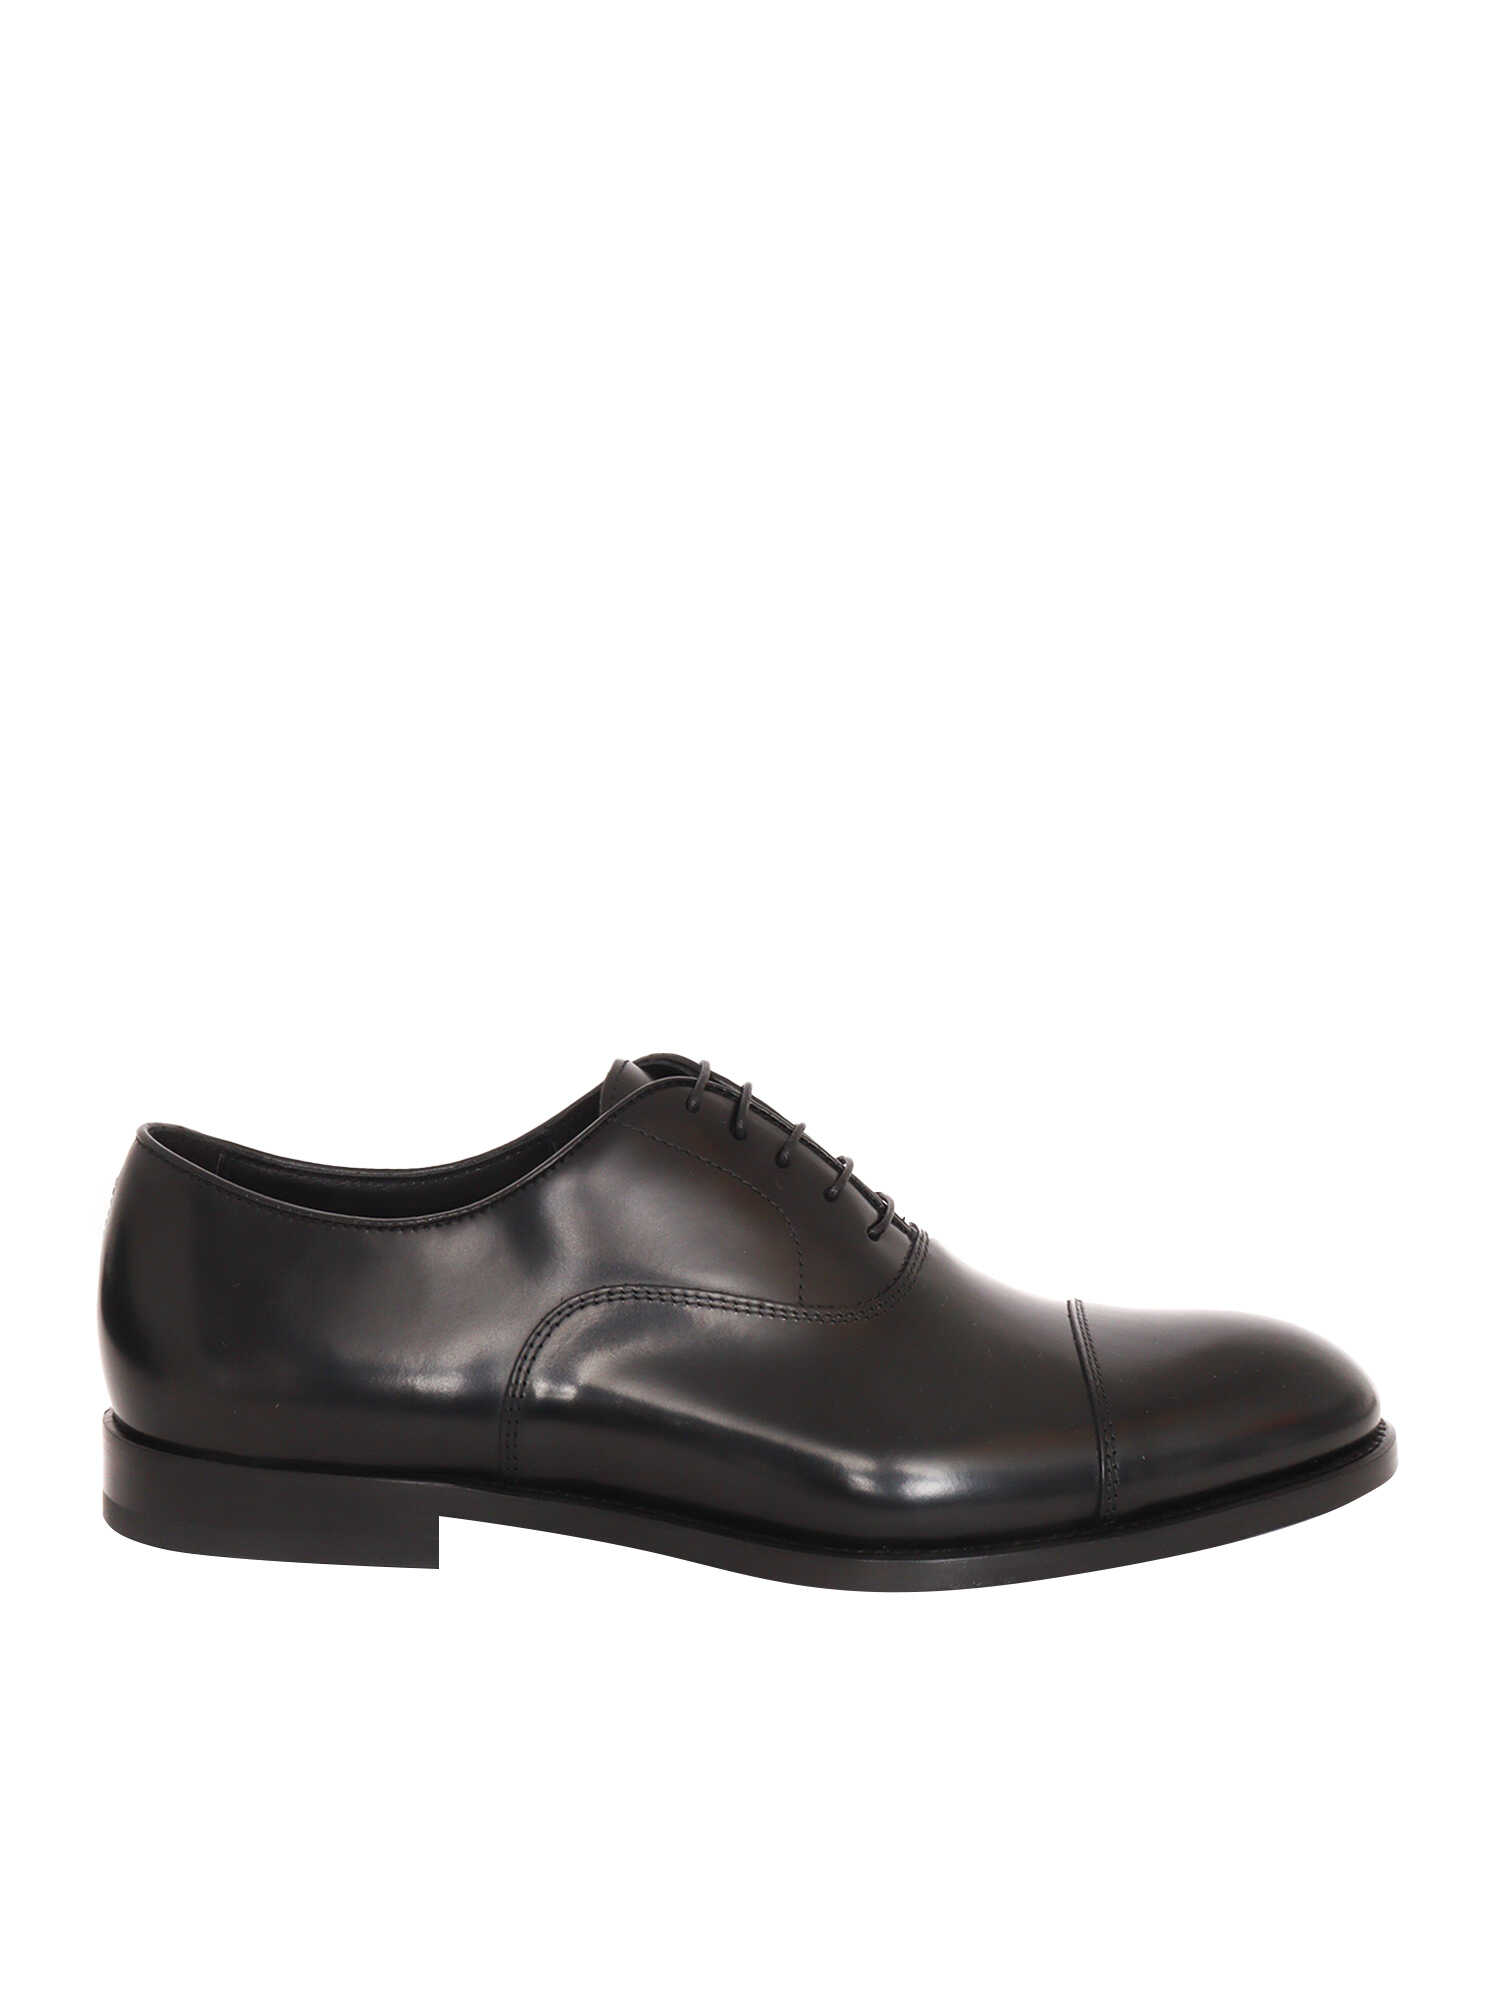 Doucal\'s Oxford shoes Black